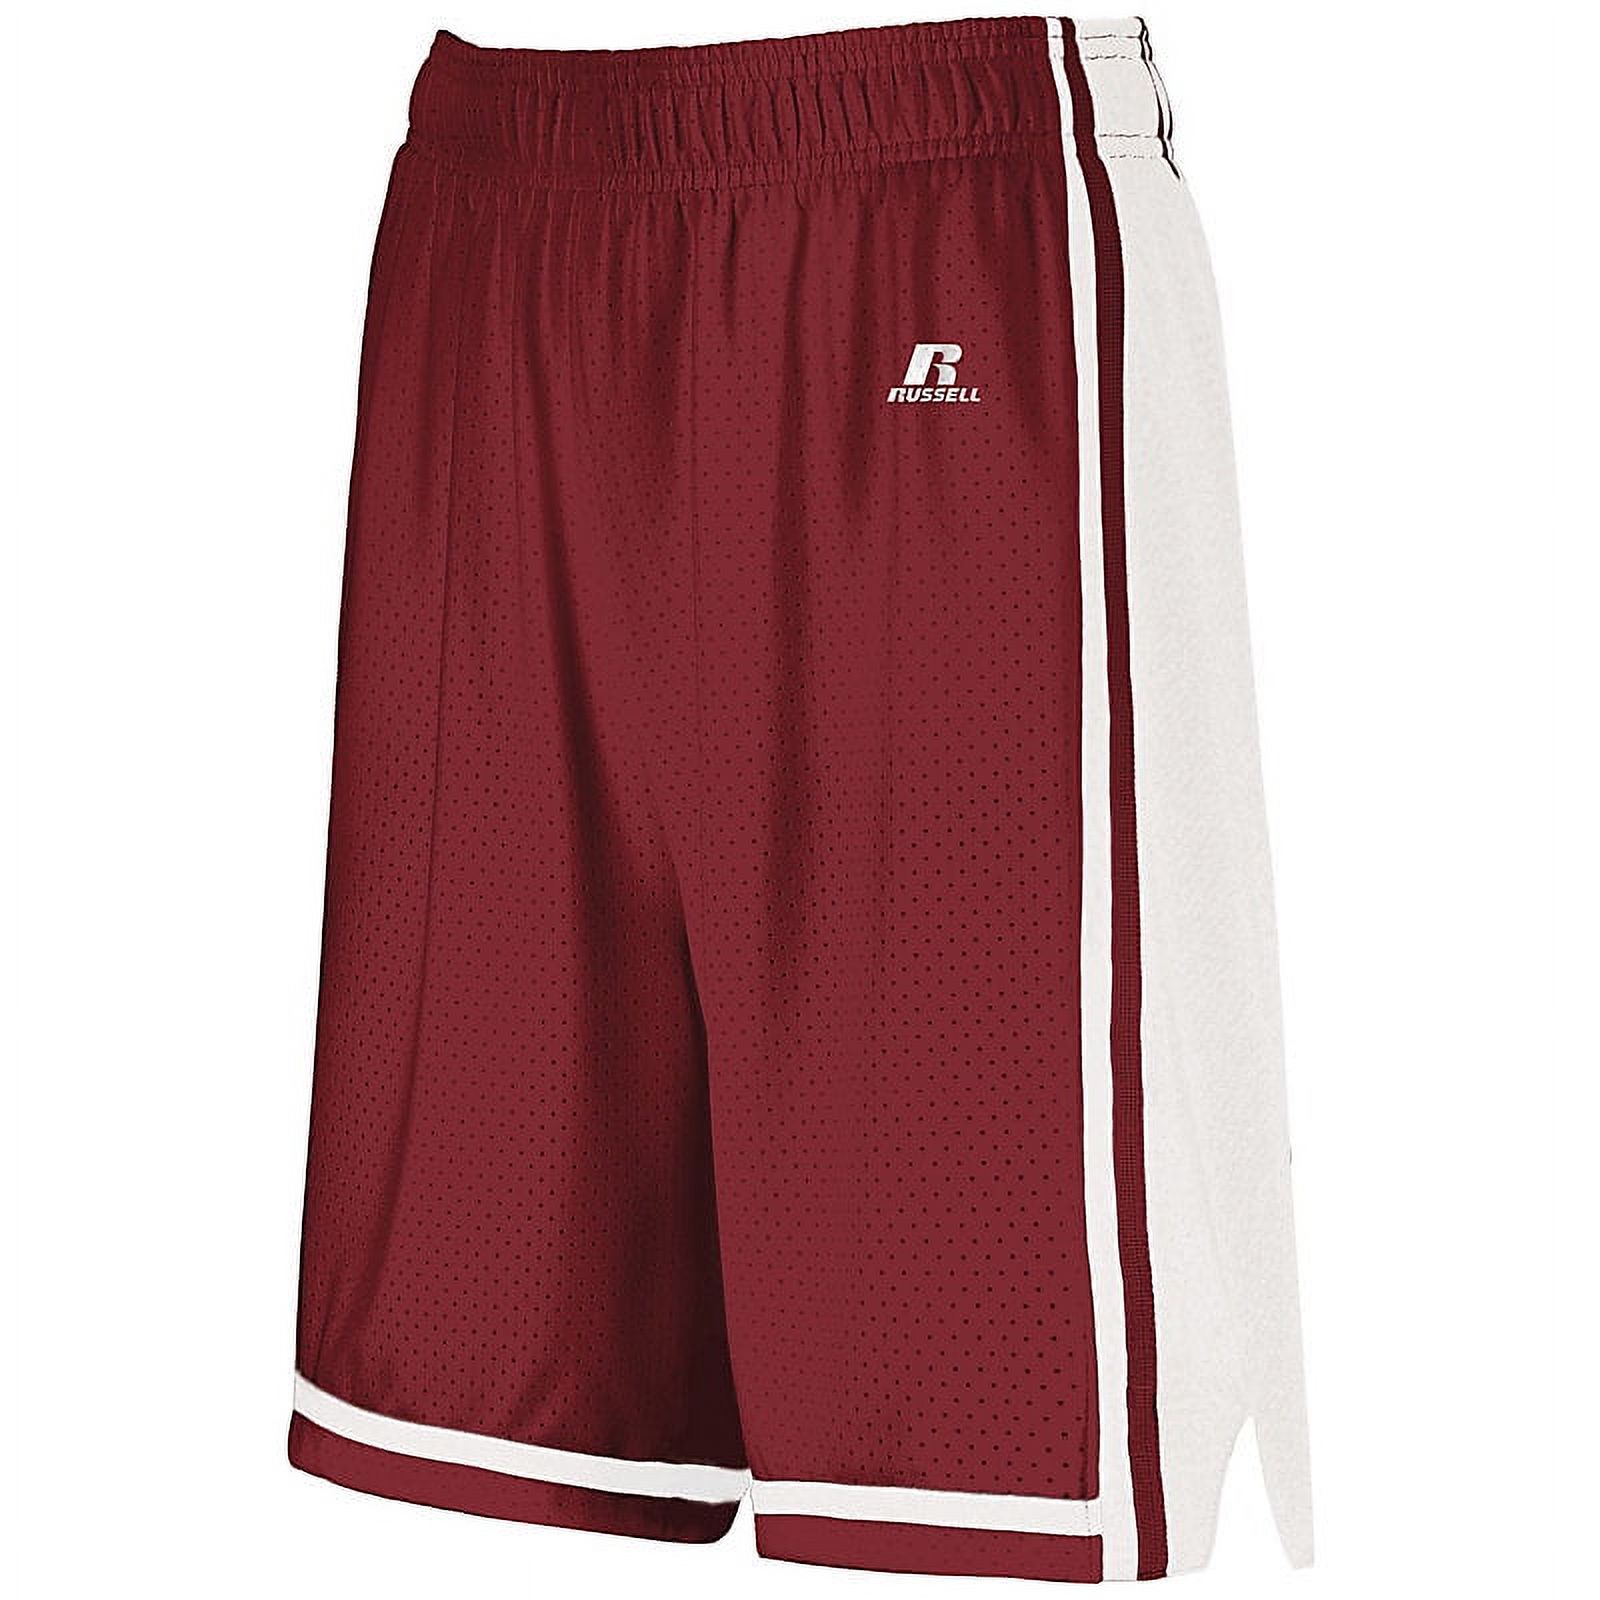 Russell Women's Legacy Basketball Shorts - 4B2VTX - image 1 of 1